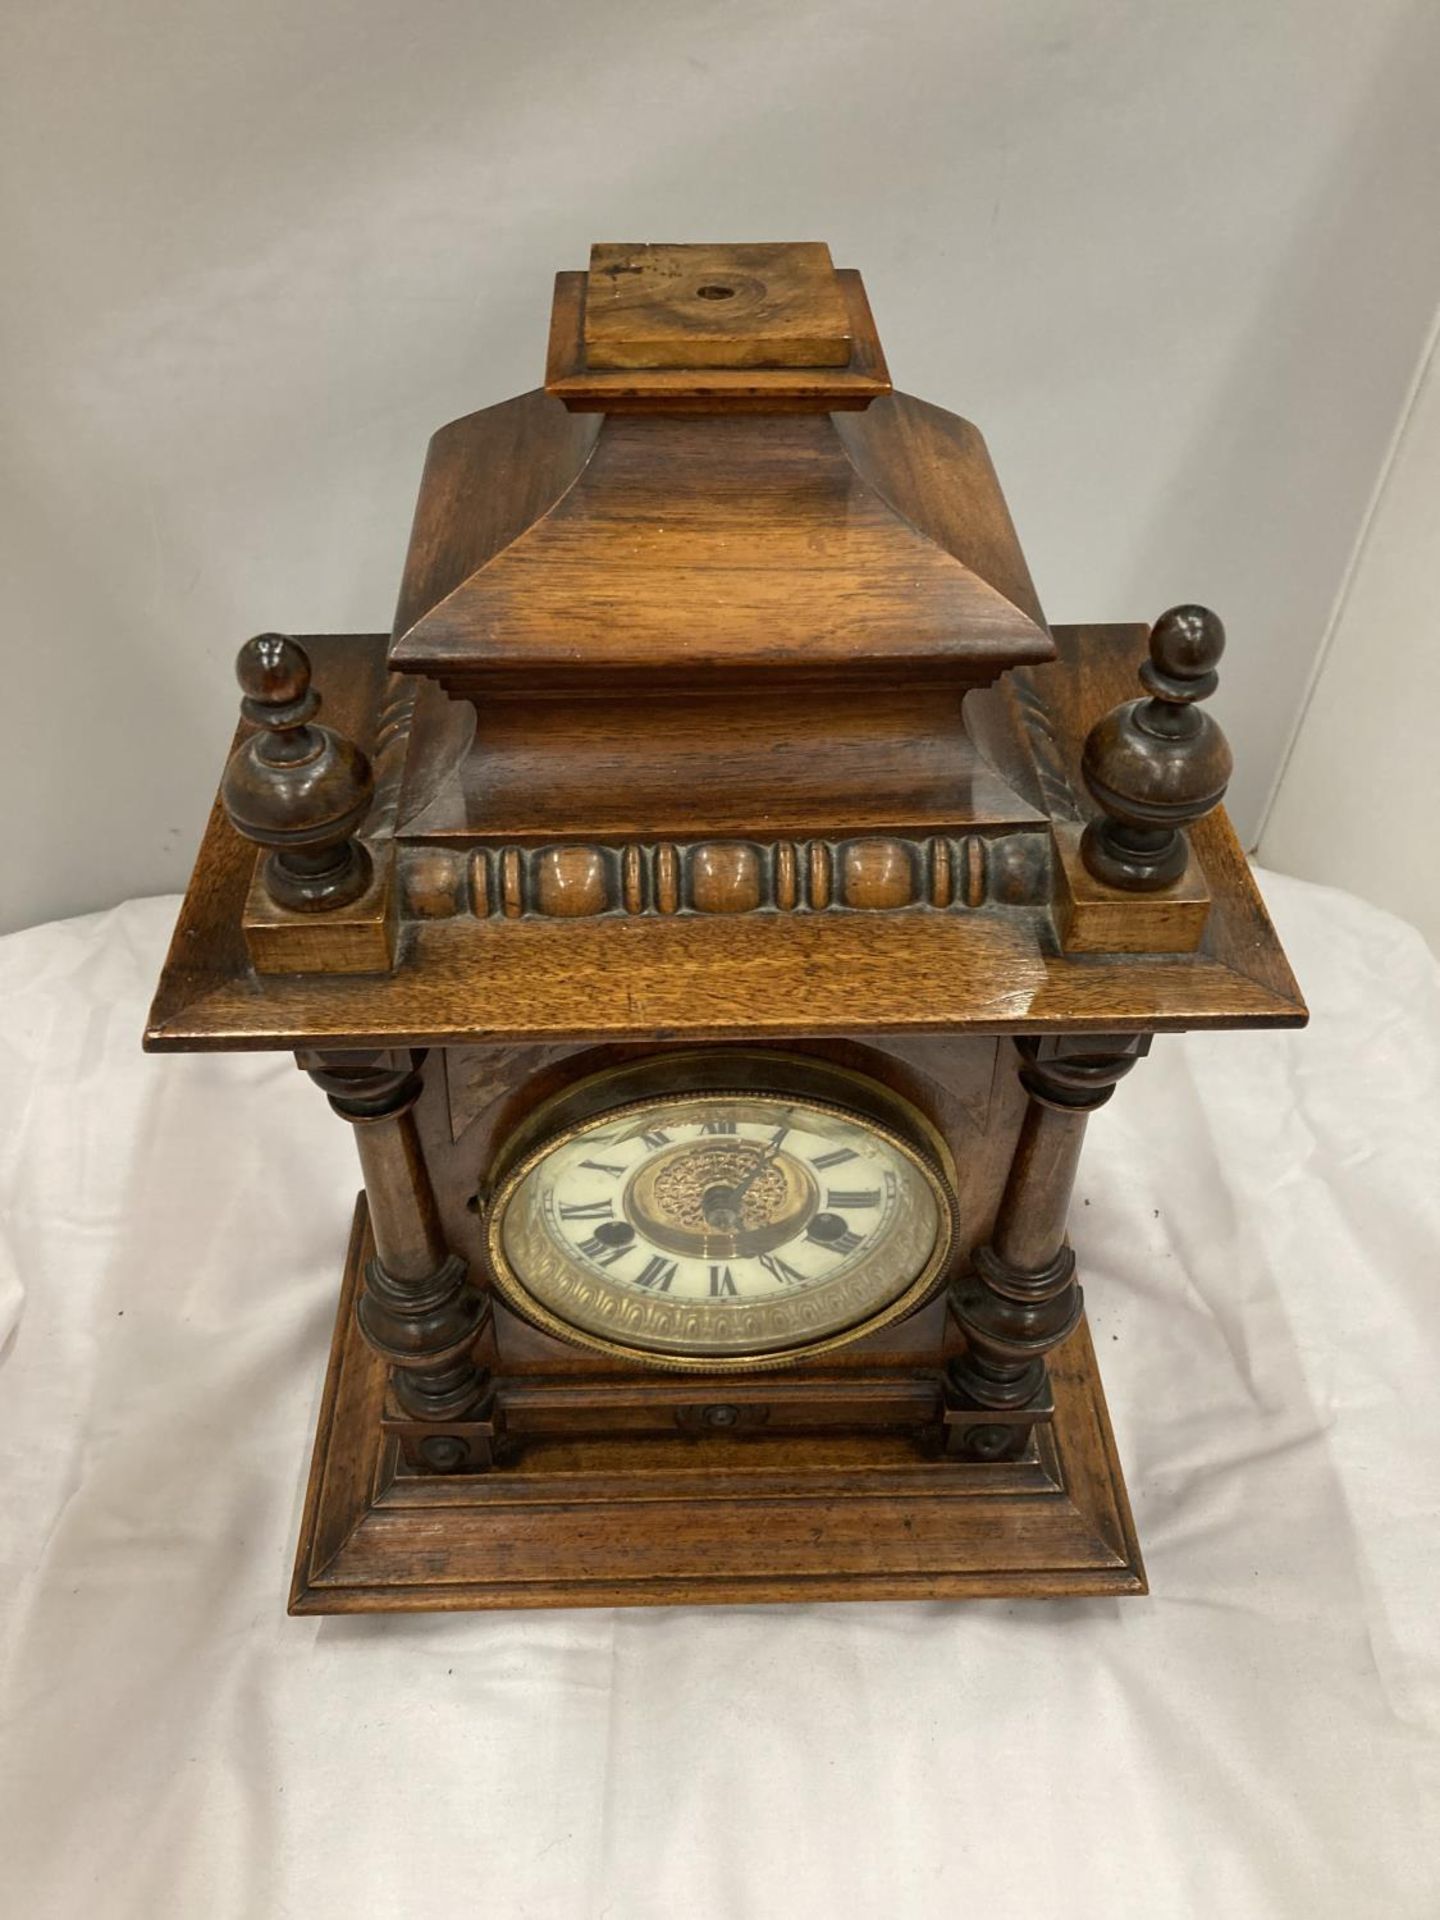 A MAHOGANY CASED MANTLE CLOCK WITH COLUMN DECORATION AND ROMAN NUMERALS HEIGHT 38CM, WIDTH 26CM, - Image 2 of 6